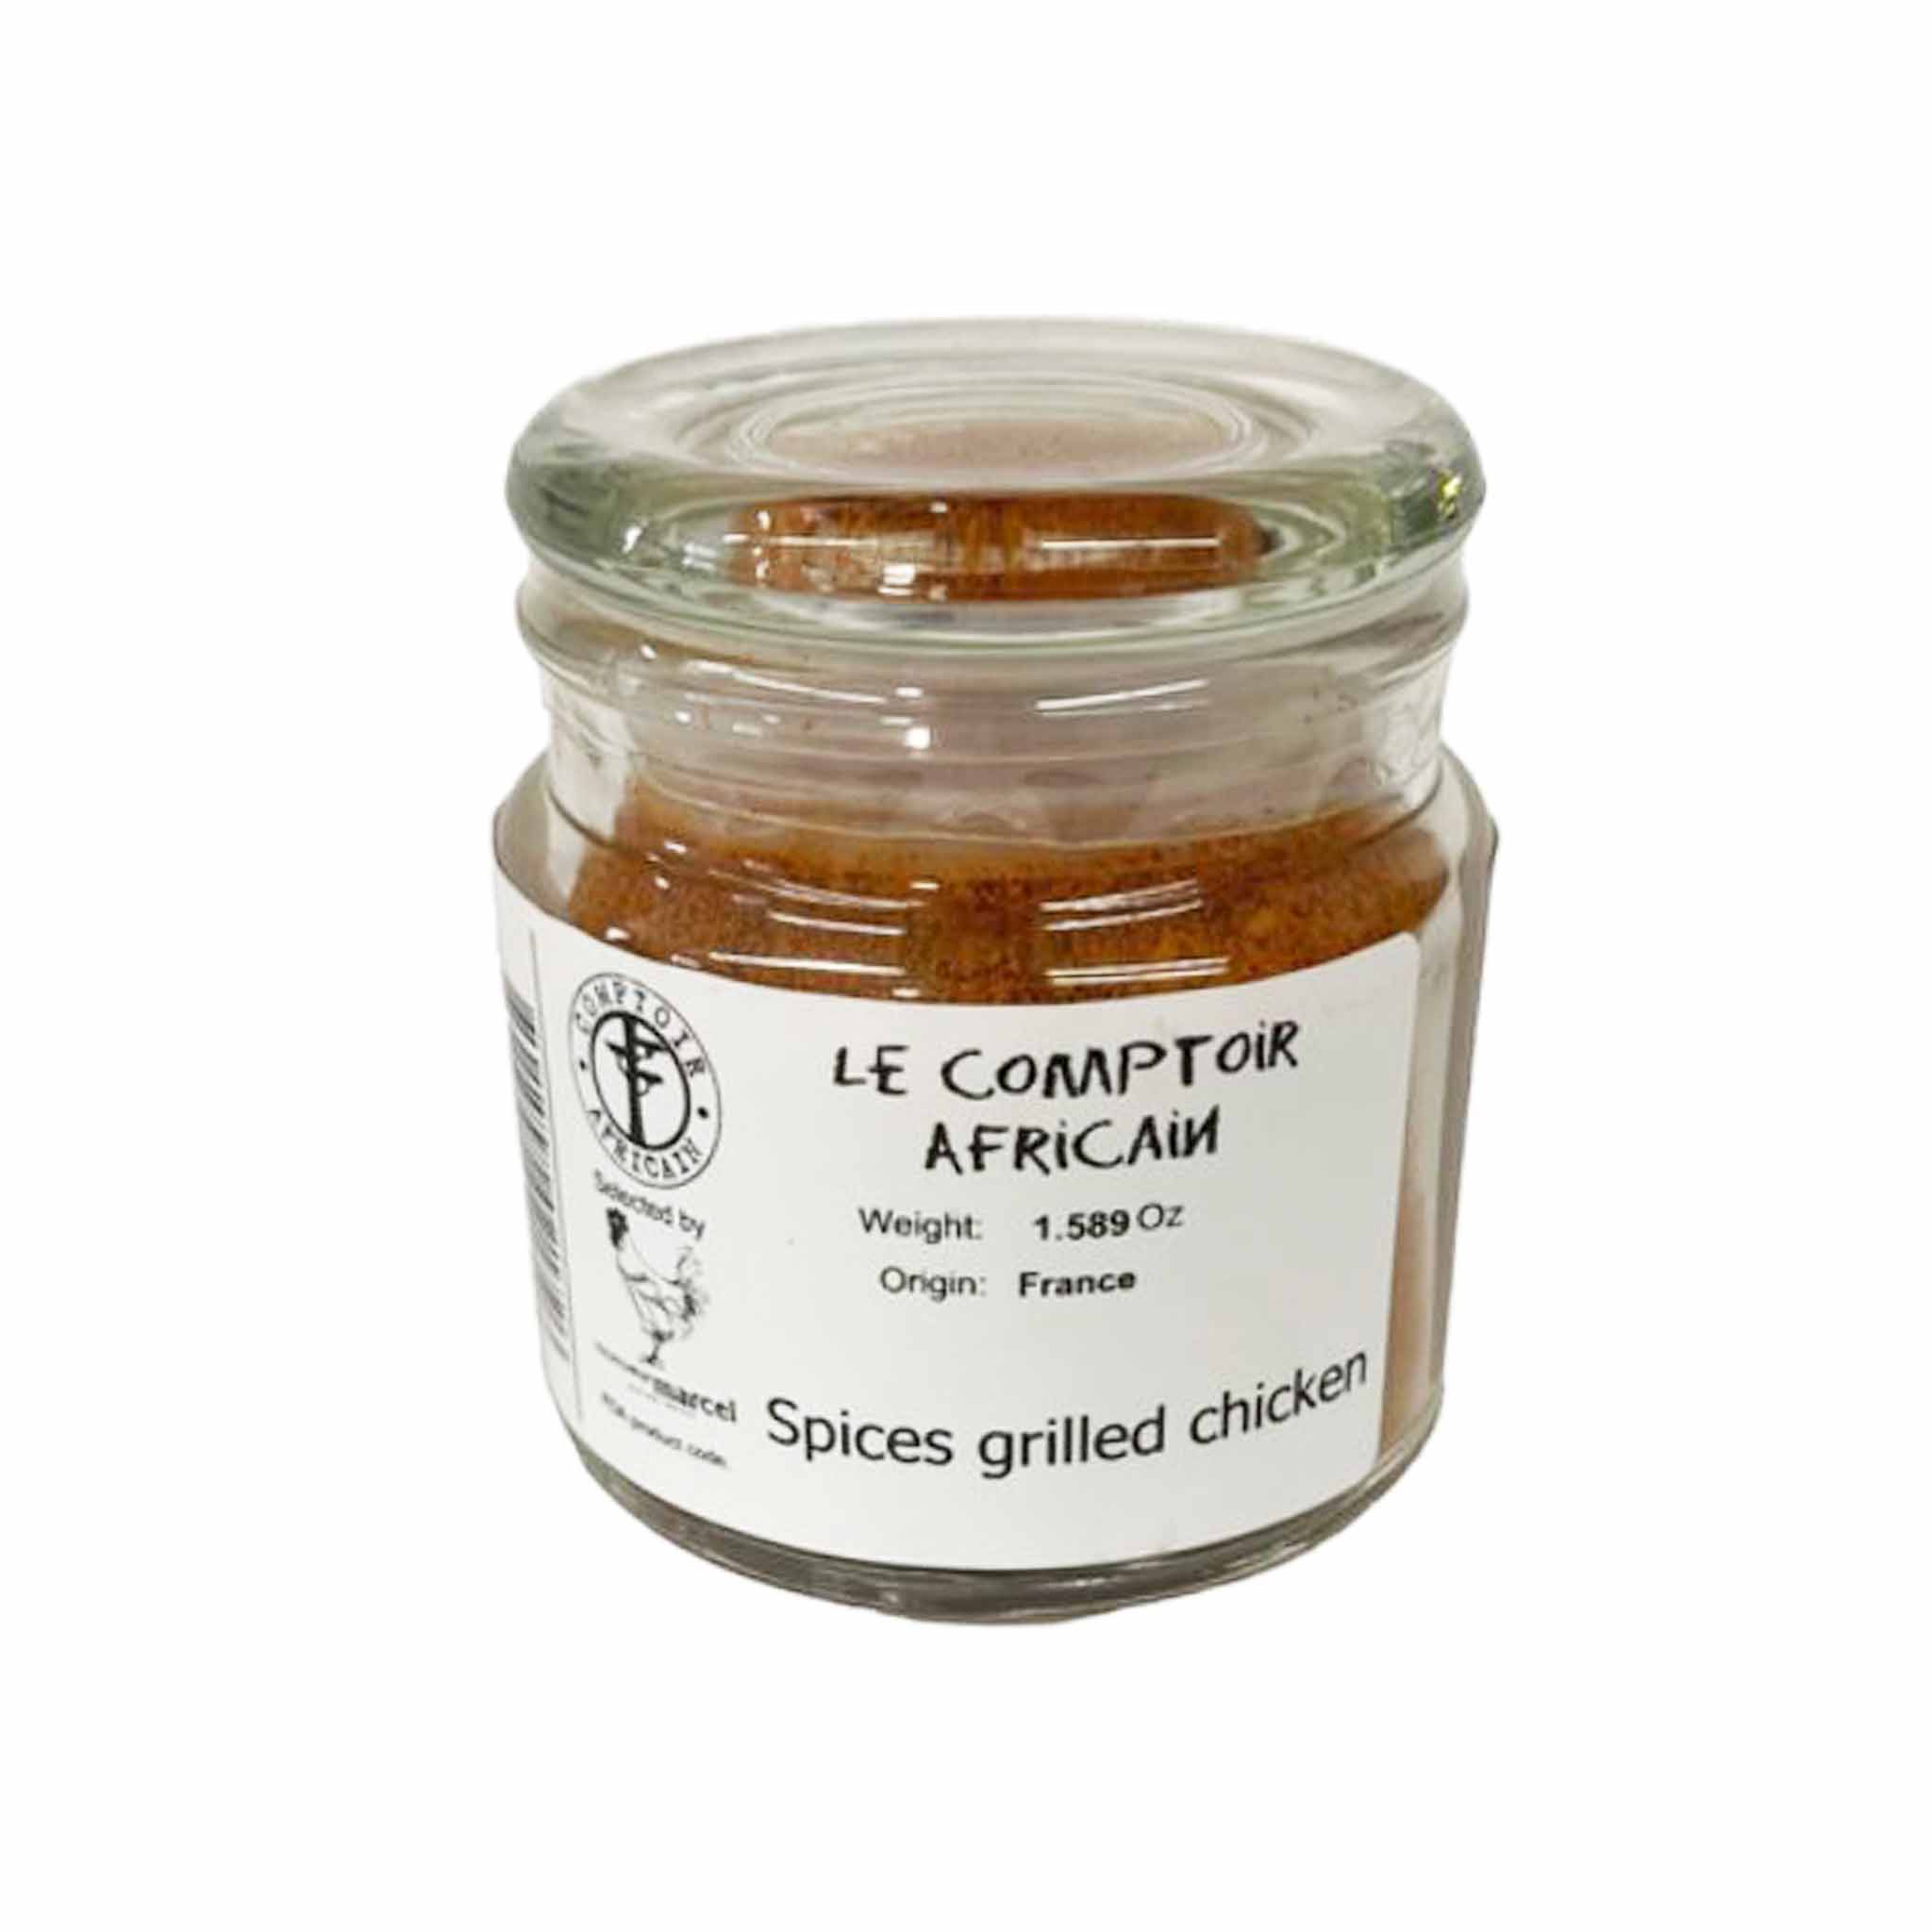 LE COMPTOIR AFRICAIN SPICES GRILLED CHICKEN 1.589oz